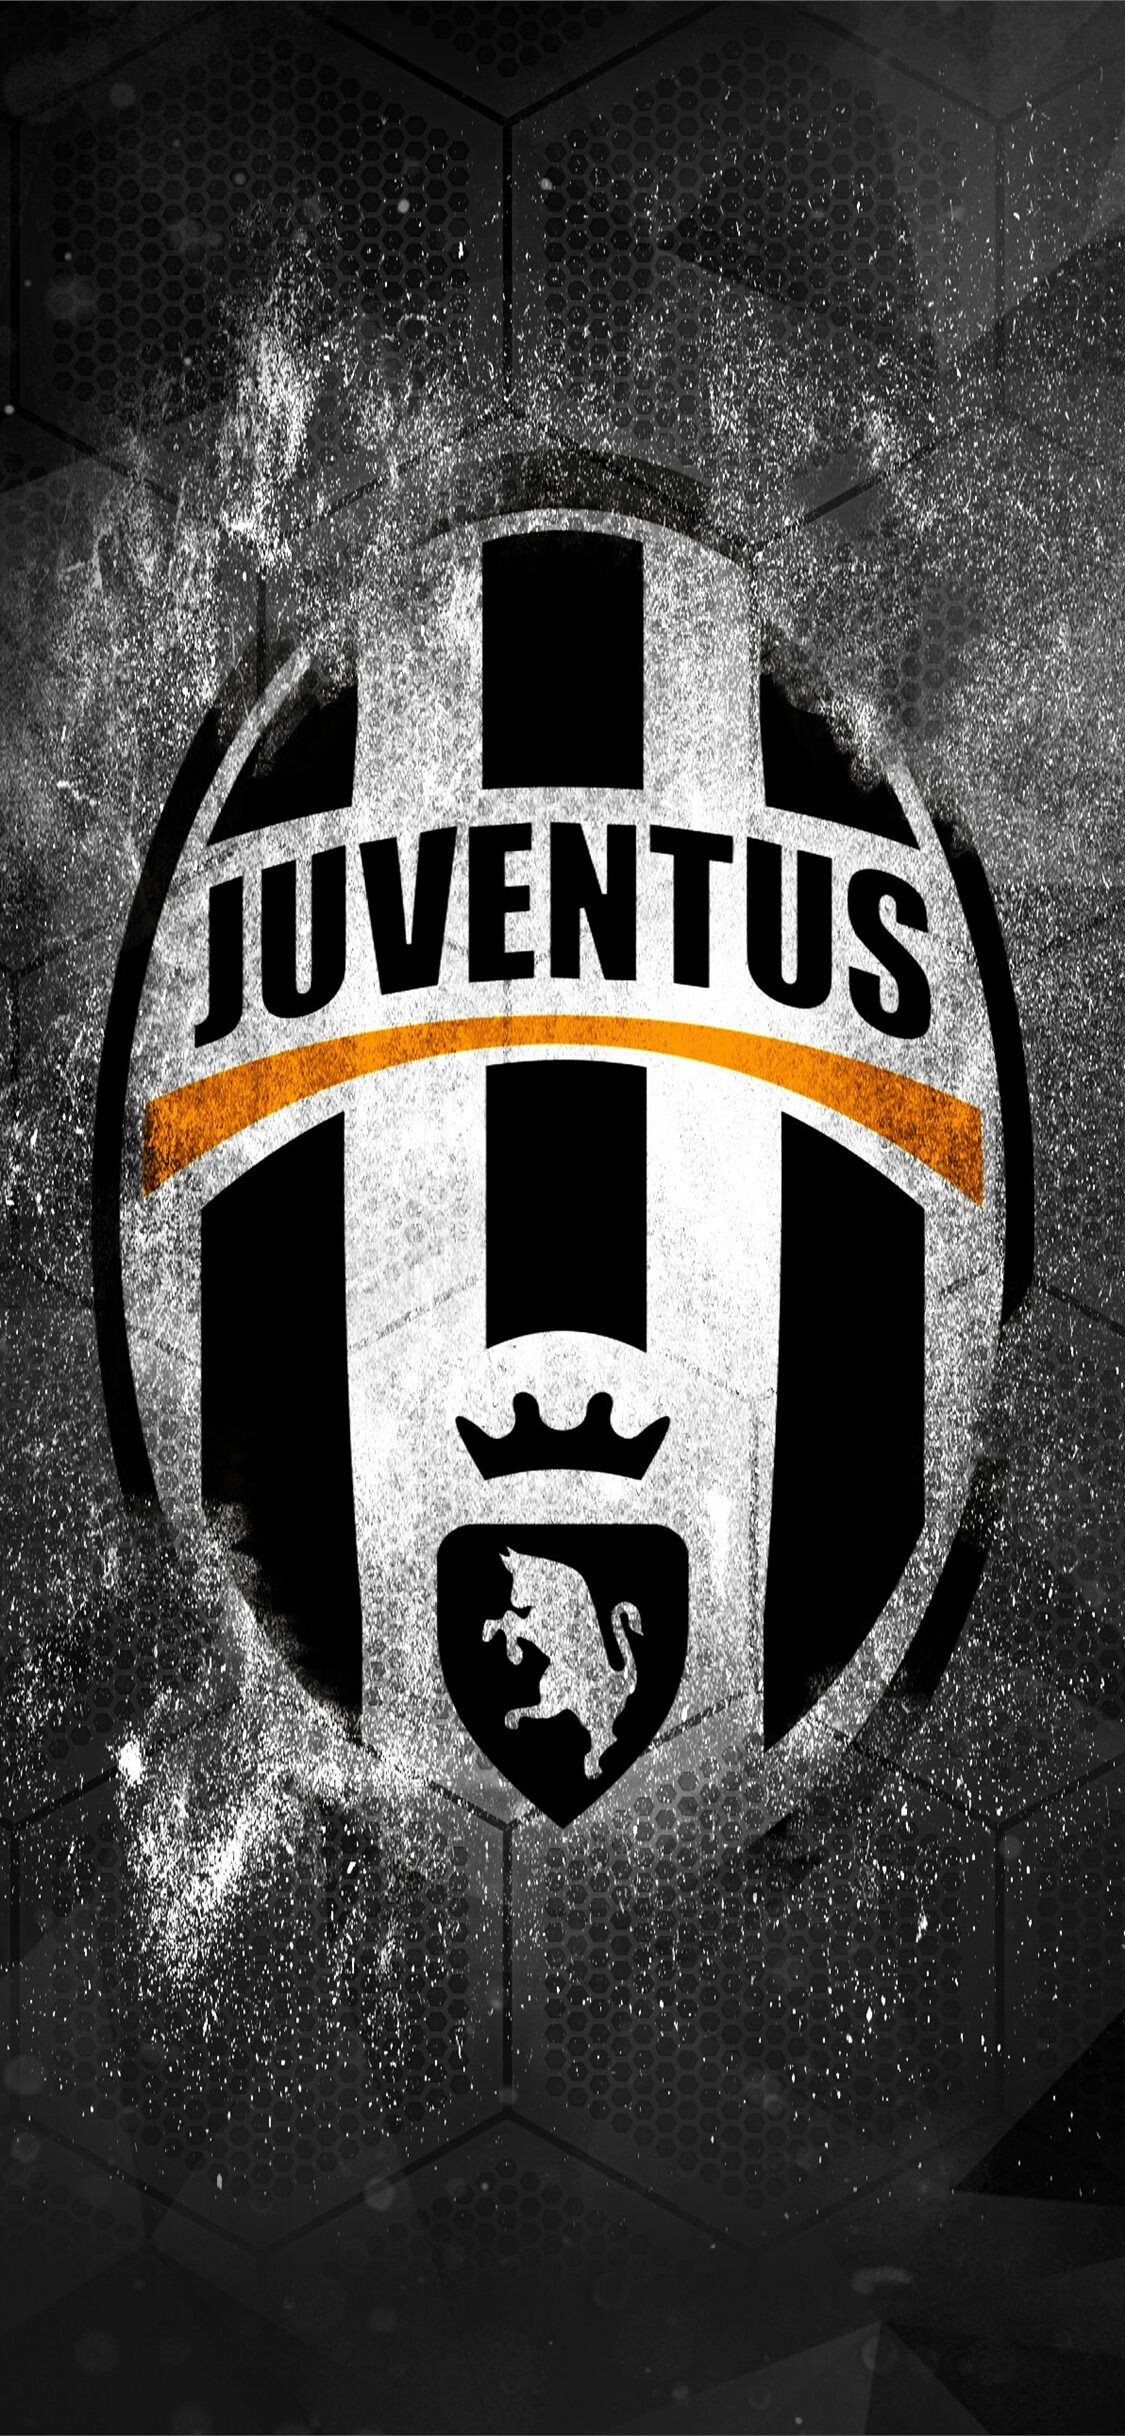 Forza Juve, Juventus logo wallpapers, Stylish and cool, Fan favorite, 1130x2440 HD Handy